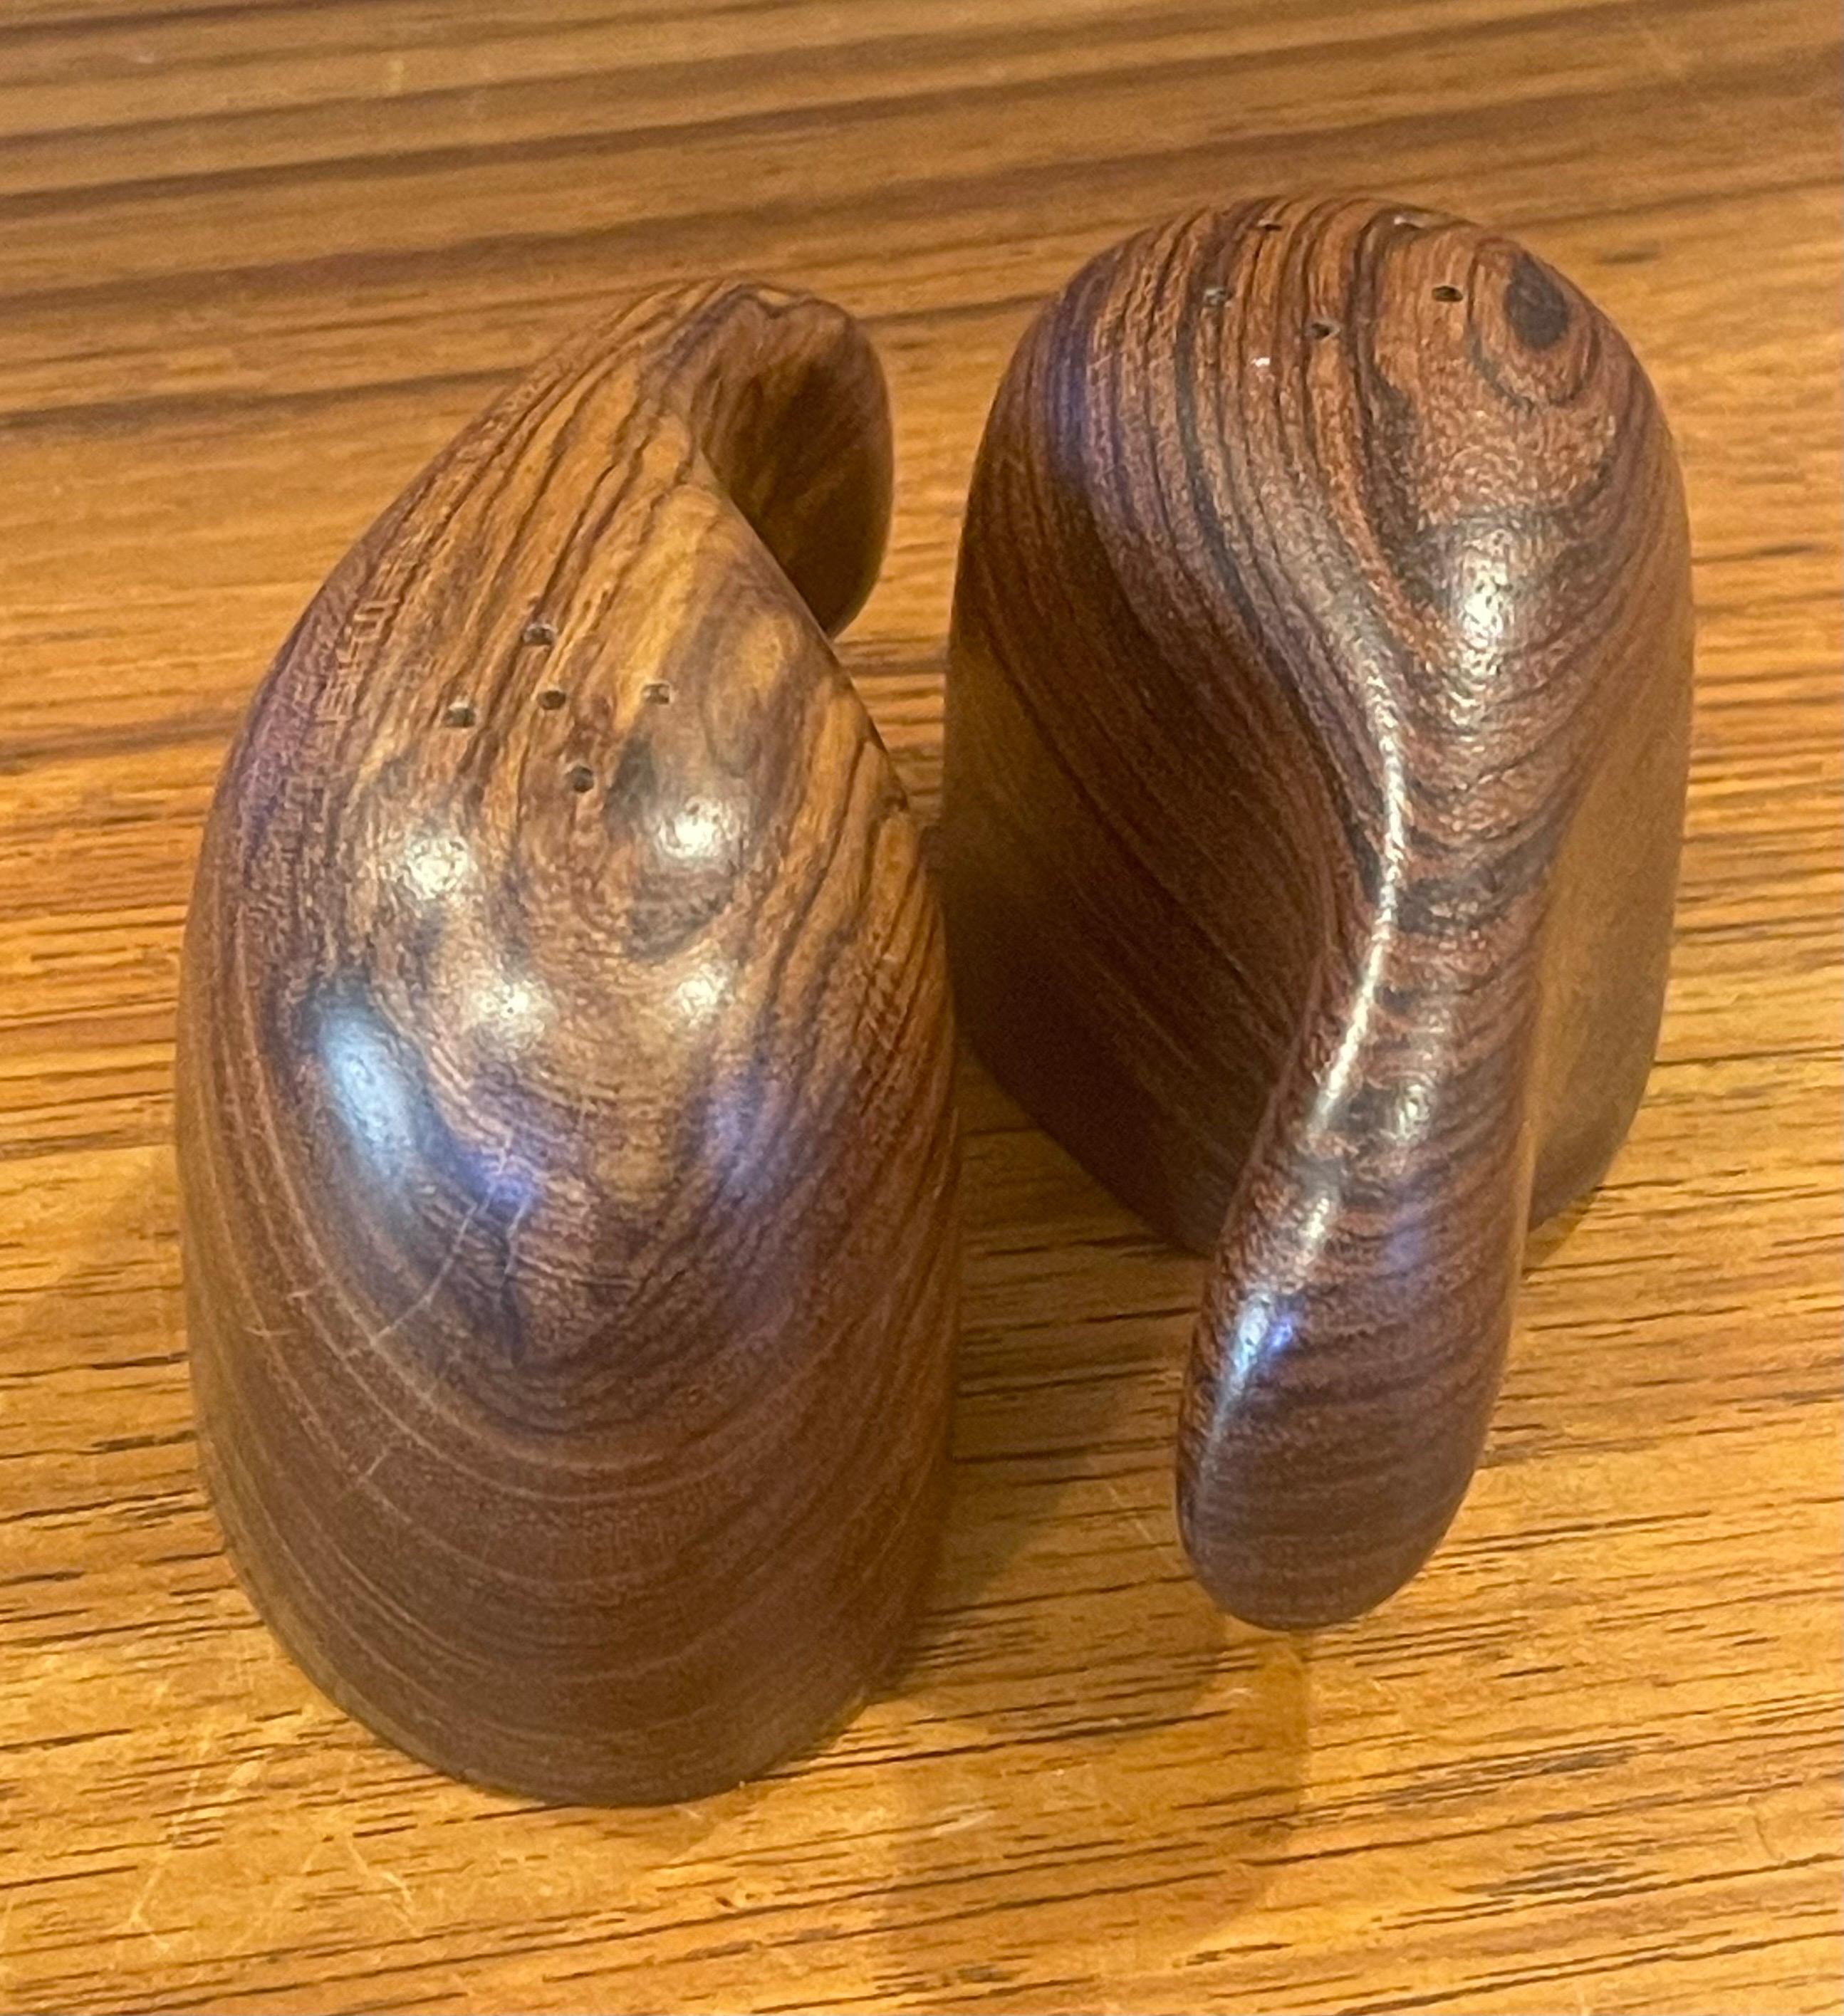 Mexican Pair of MCM Cocobolo Wood Minimalist Salt & Pepper Shakers by Don Shoemaker For Sale